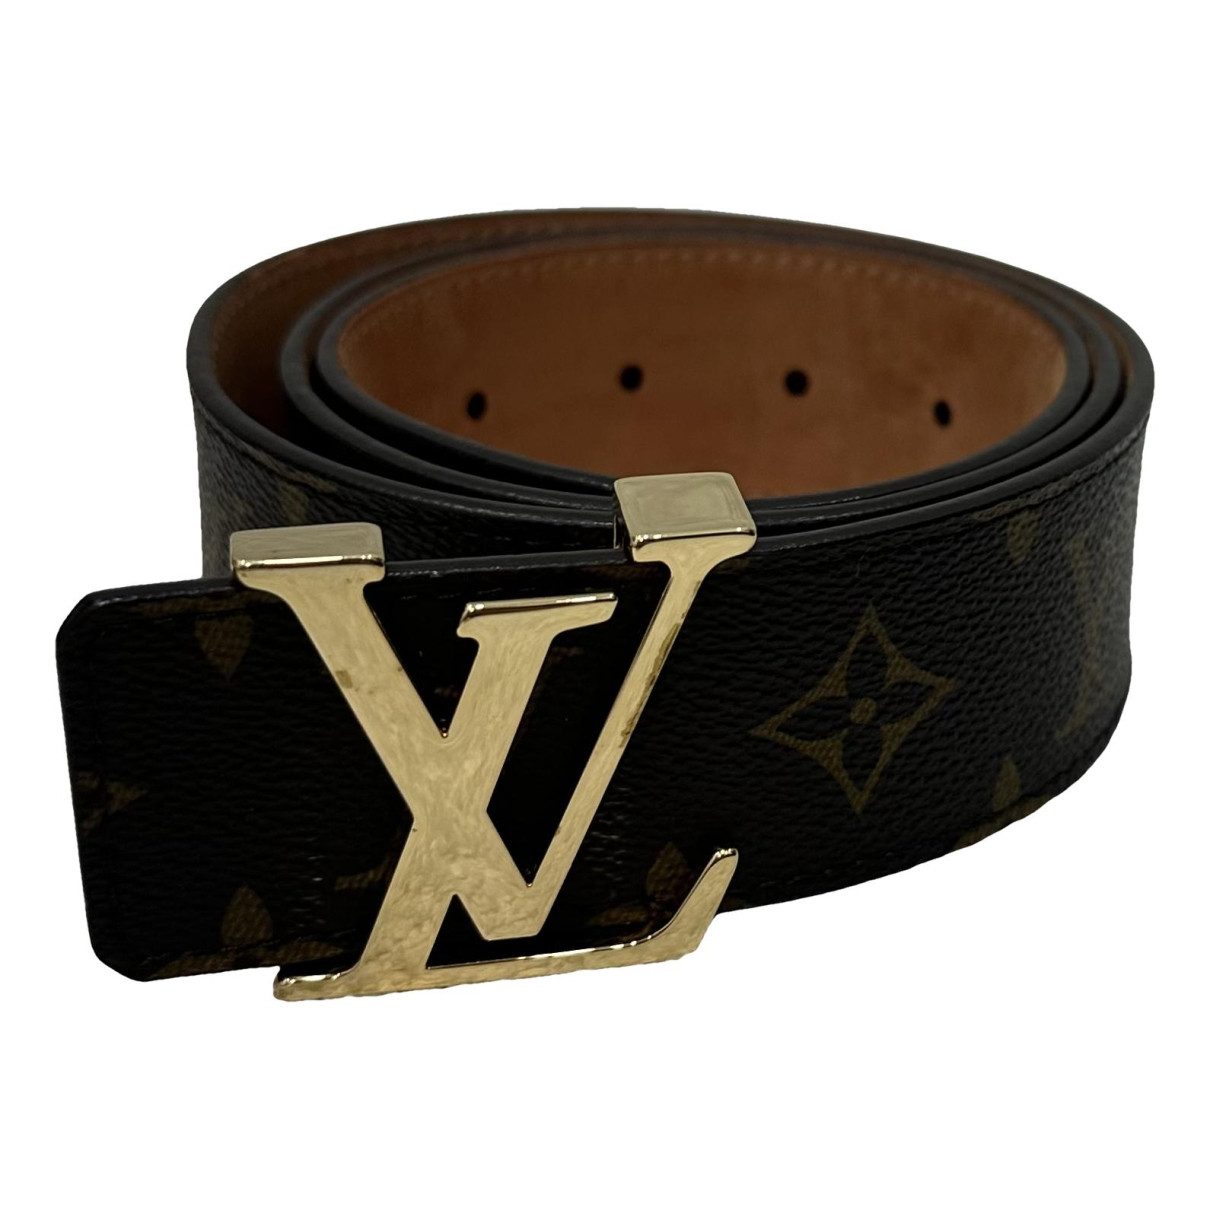 accessories Louis Vuitton belts for Female Leather 85 cm. Used condition